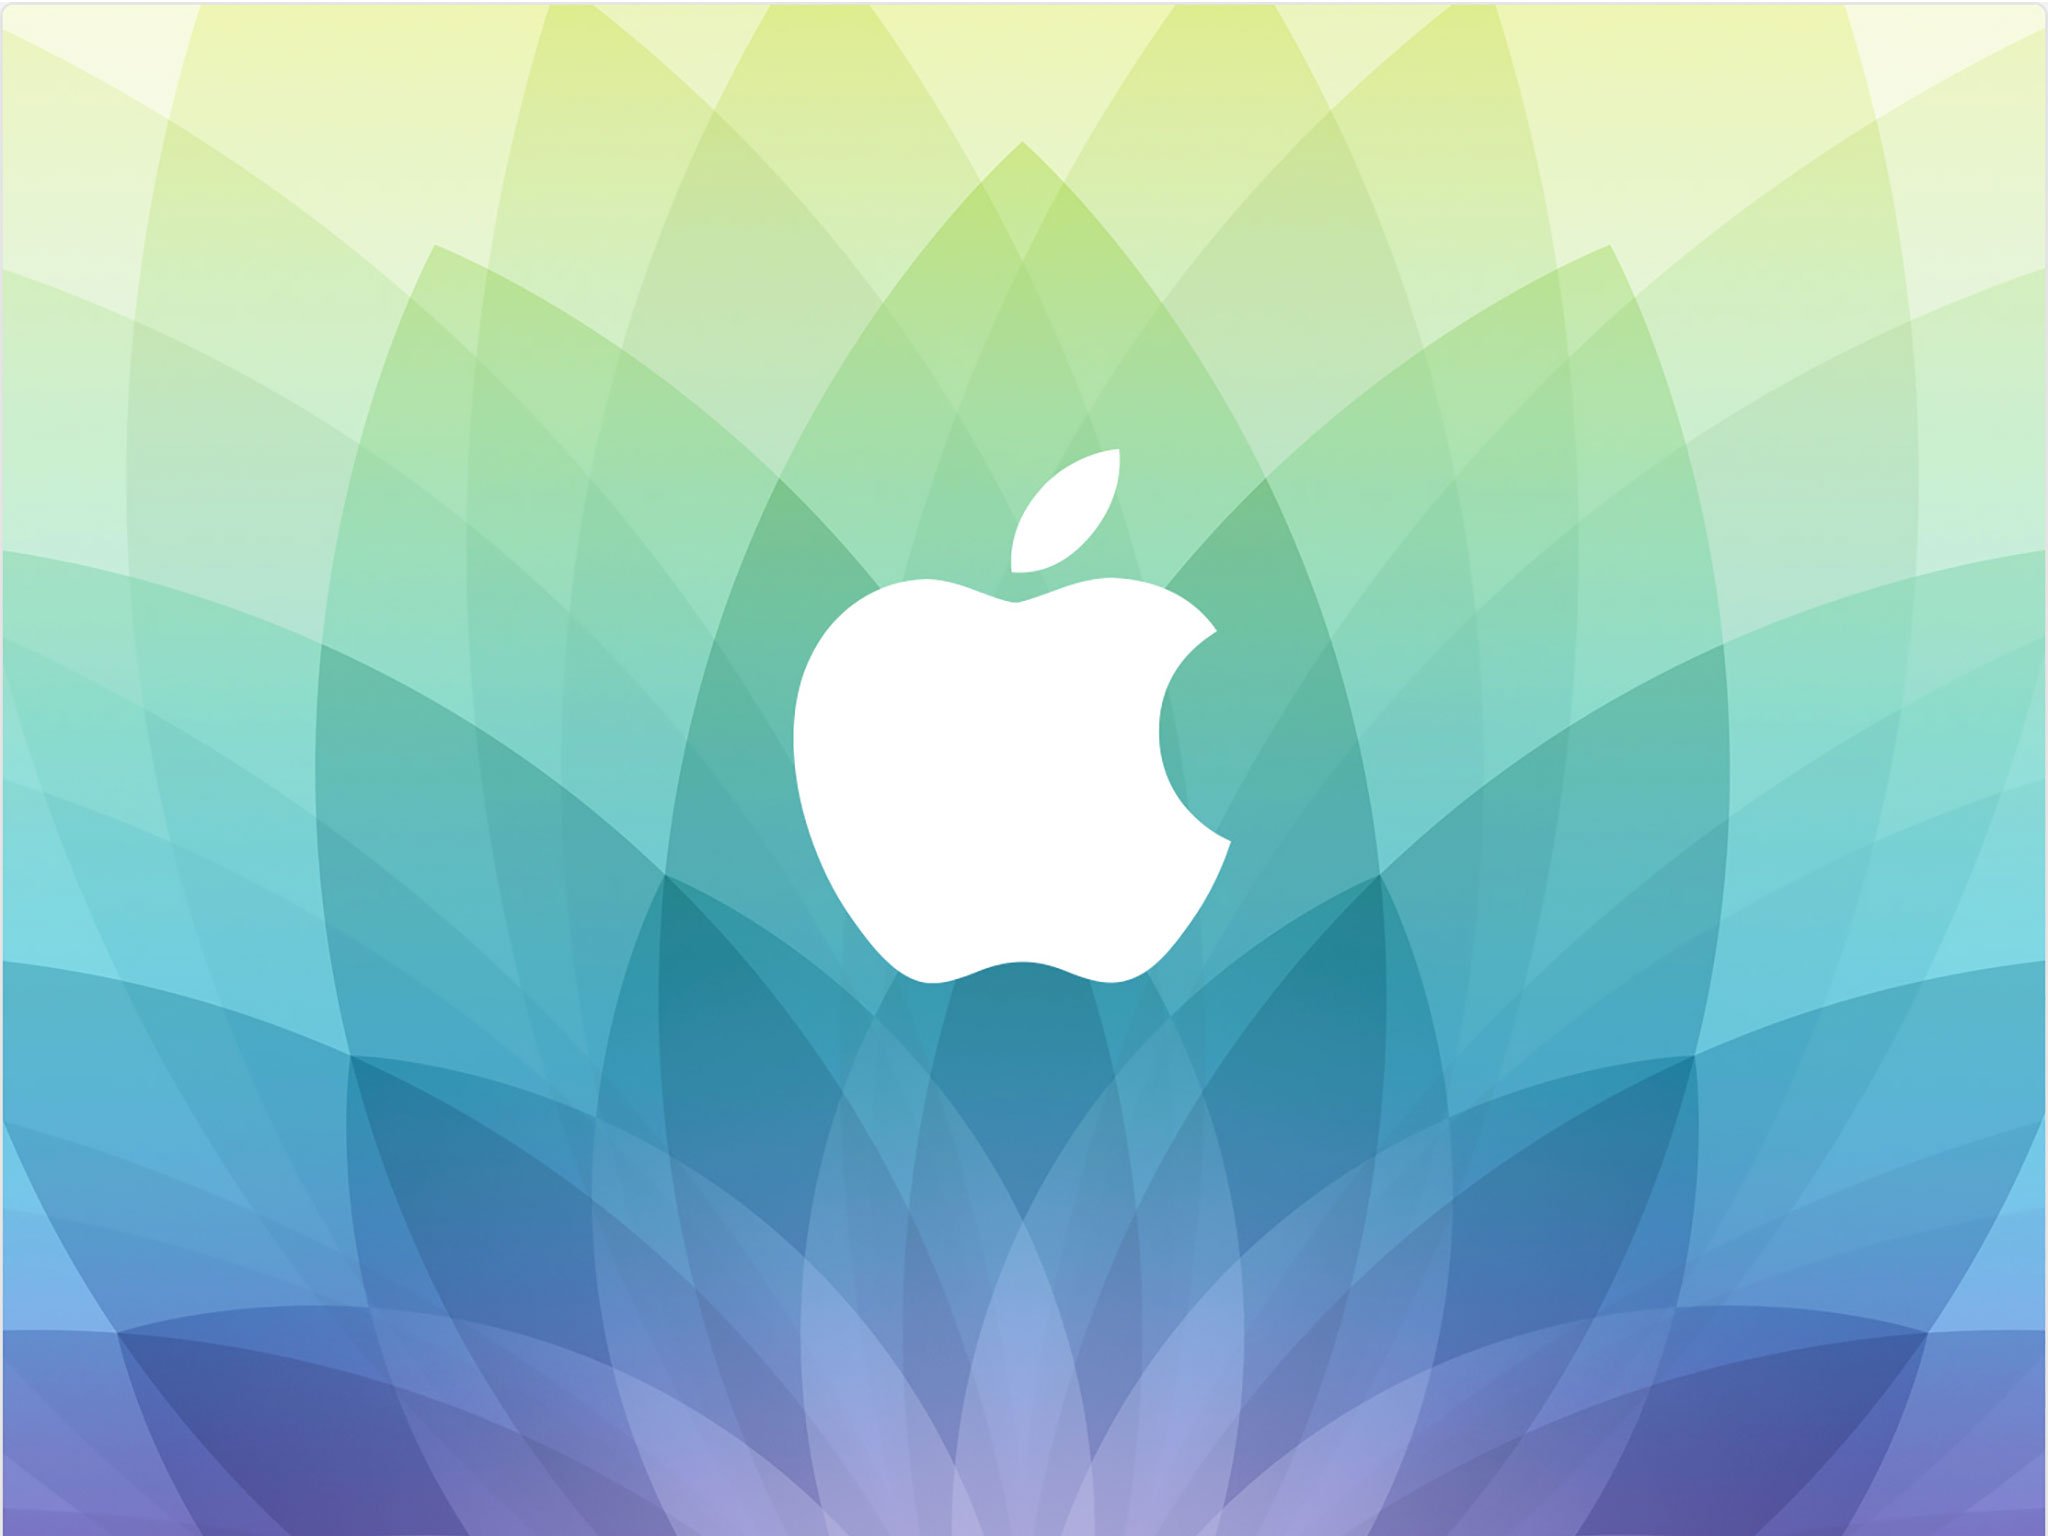 Here's what to expect from Apple's March 9 event